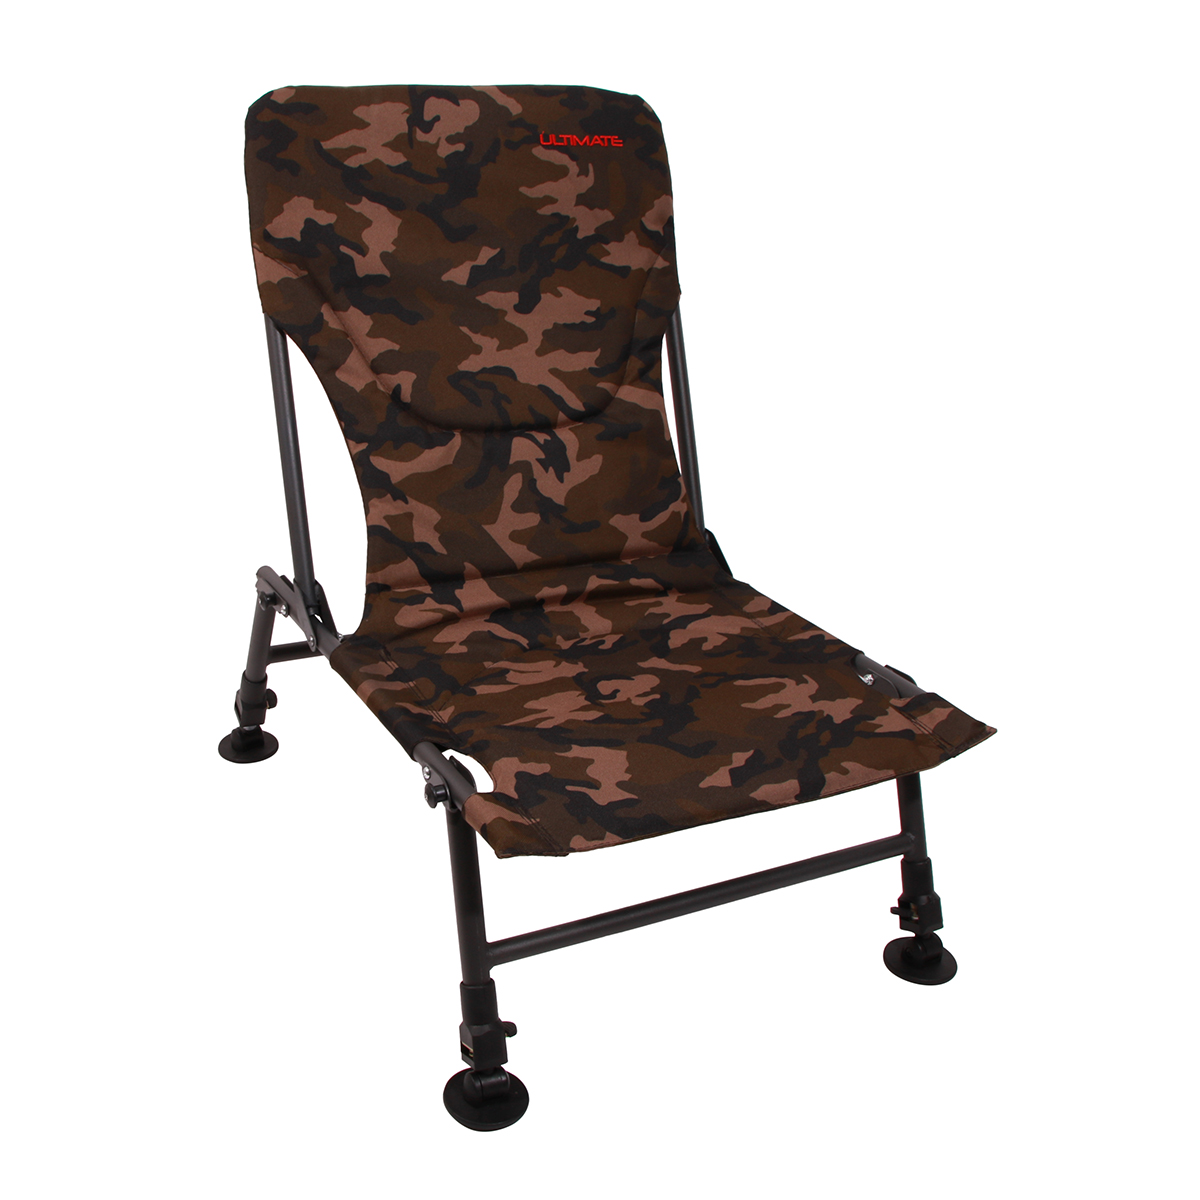 Ultimate Session Chair Camo